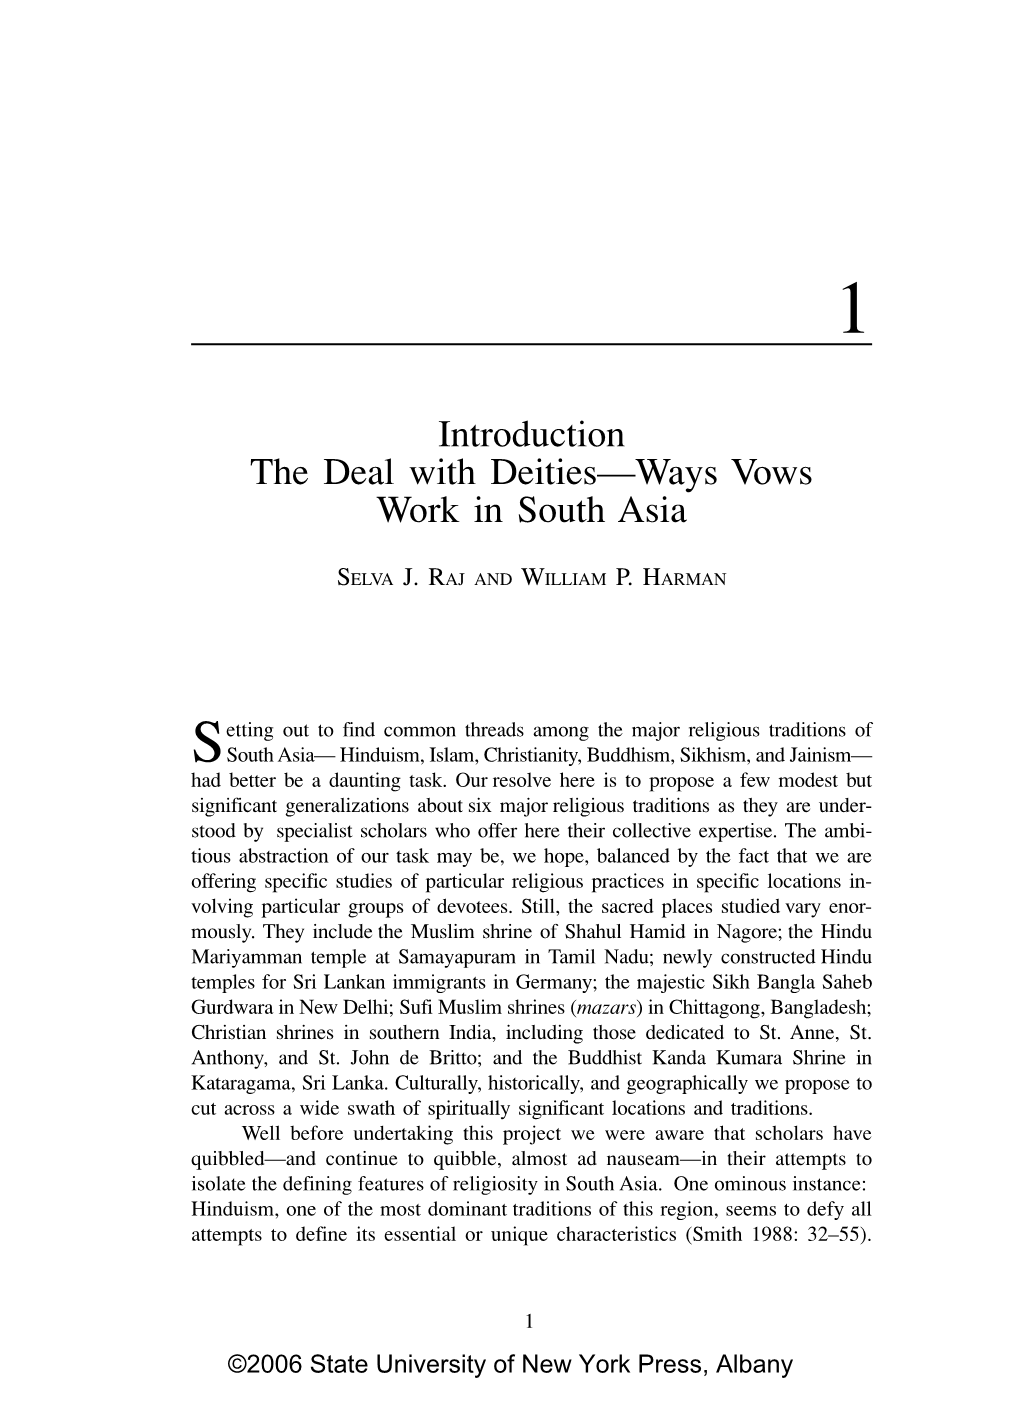 Introduction the Deal with Deities—Ways Vows Work in South Asia